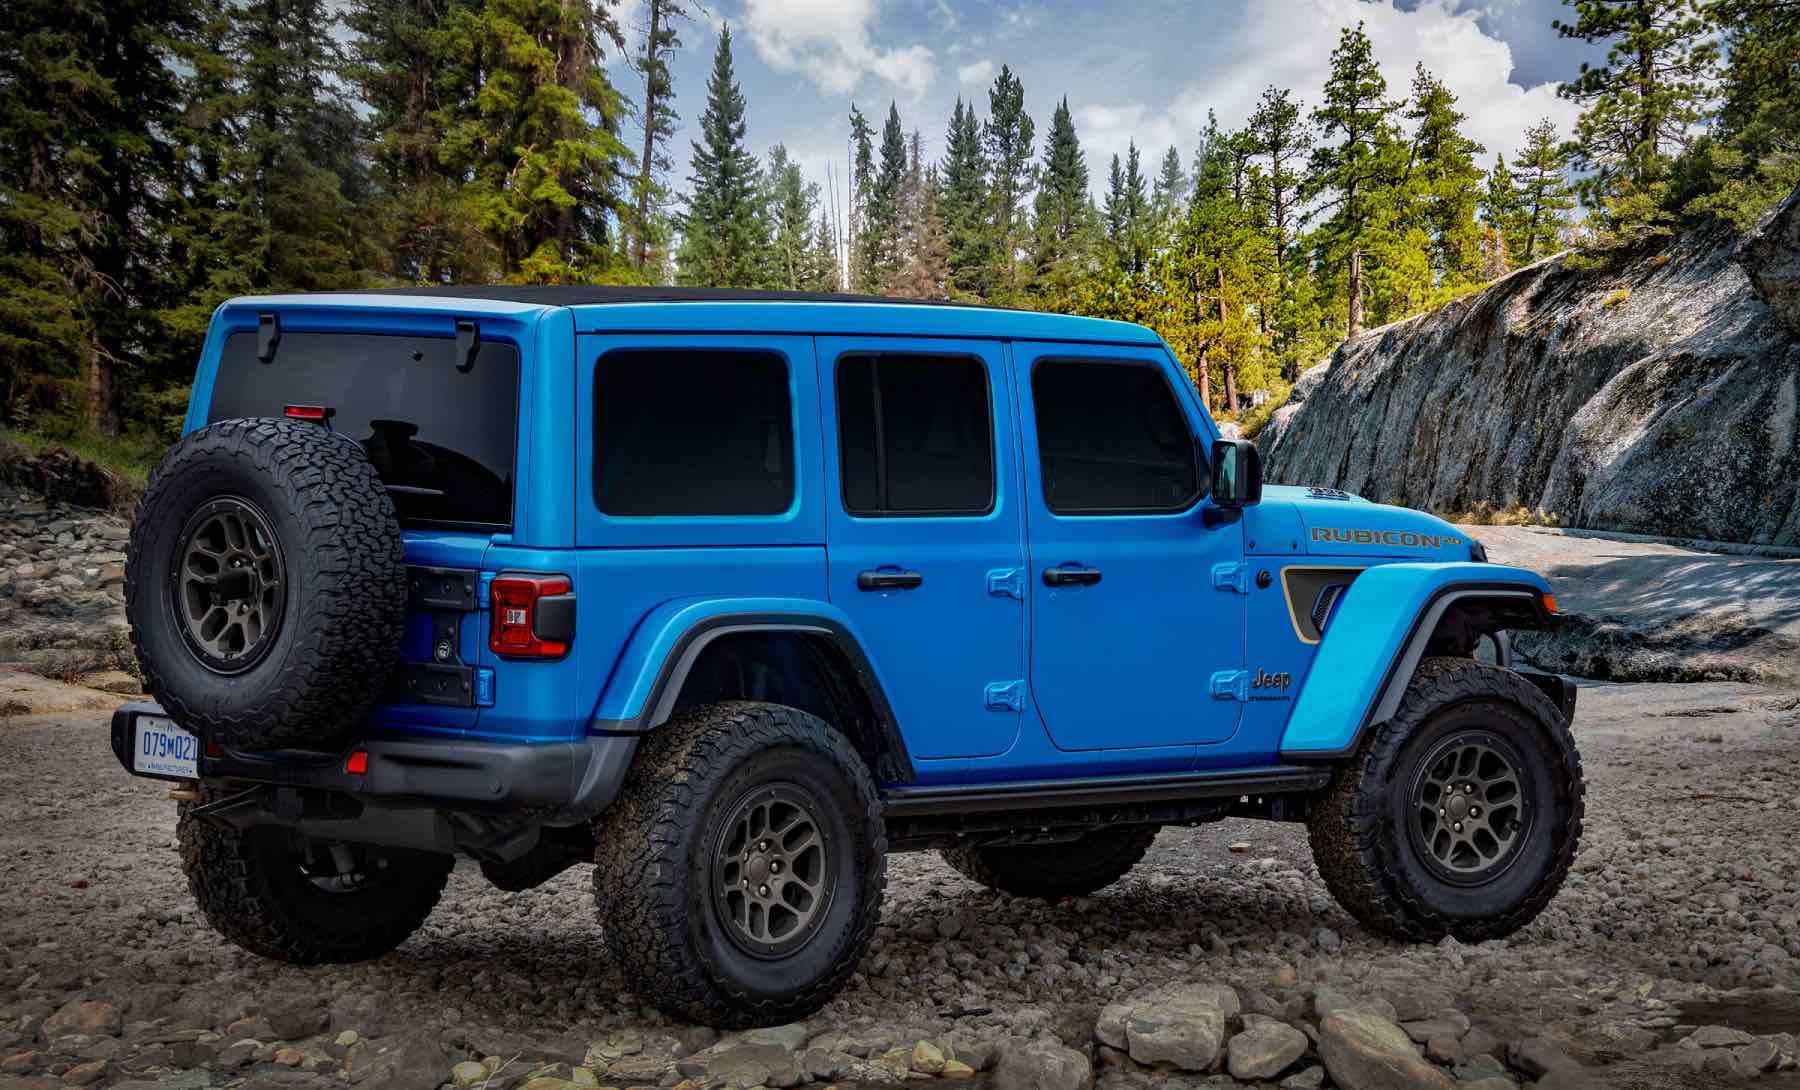 Rear view of a Jeep Wrangler Rubicon, ranked among the best SUVs for tall people, in an alpine forest.